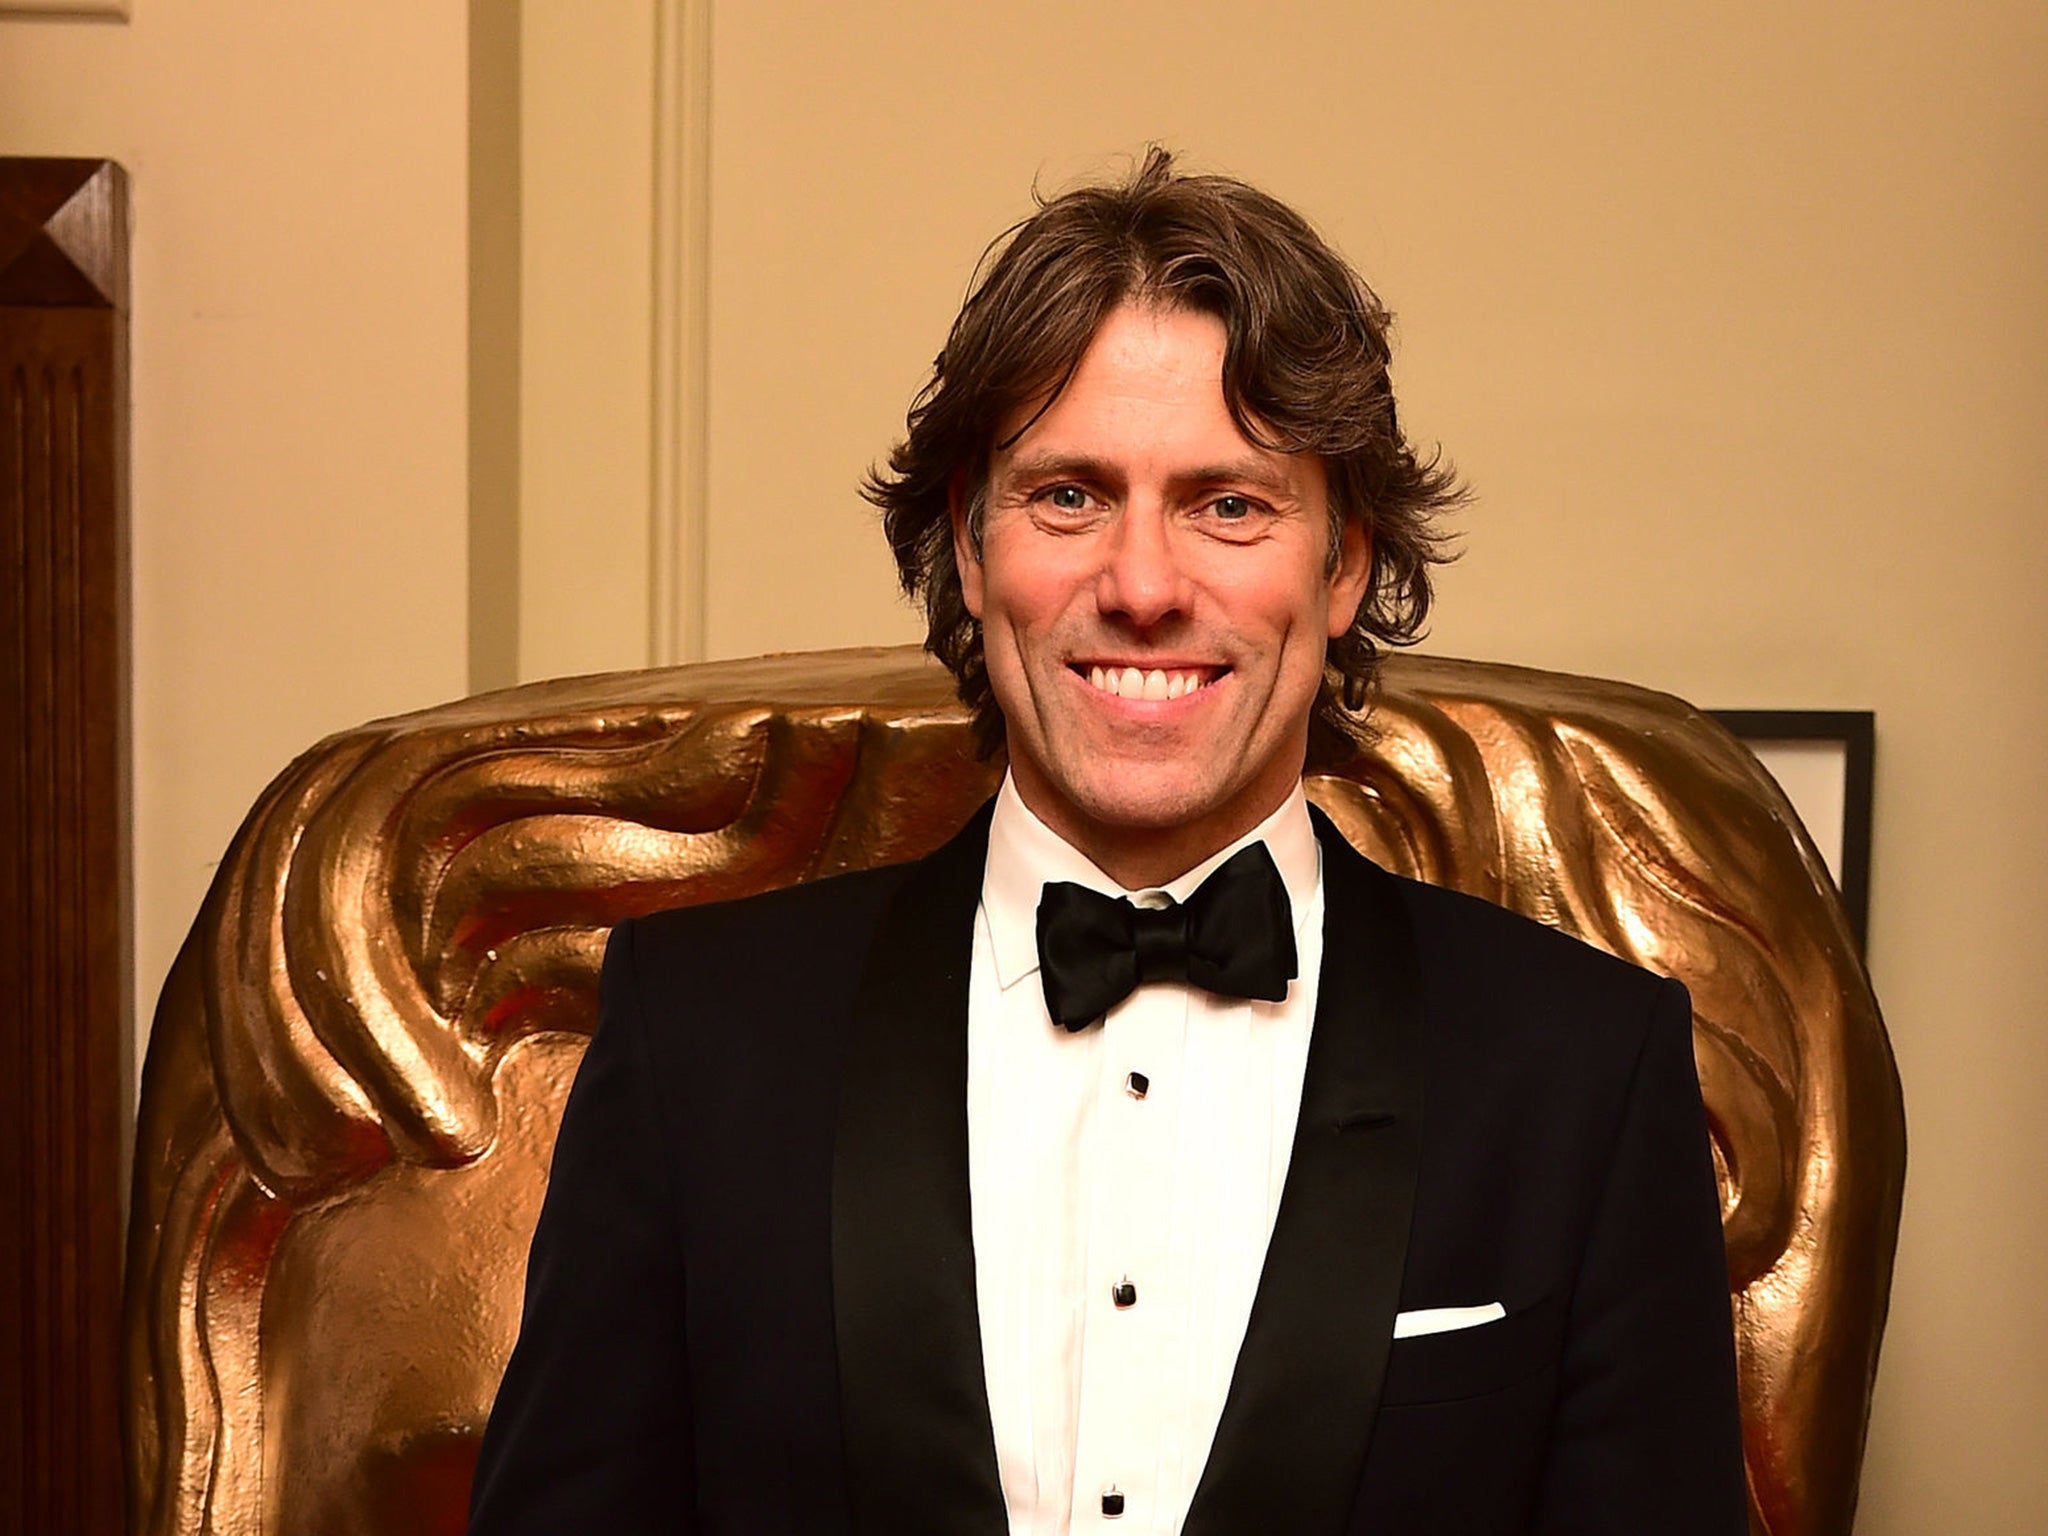 The John Bishop Show was commissioned on the back of successful Christmas runs